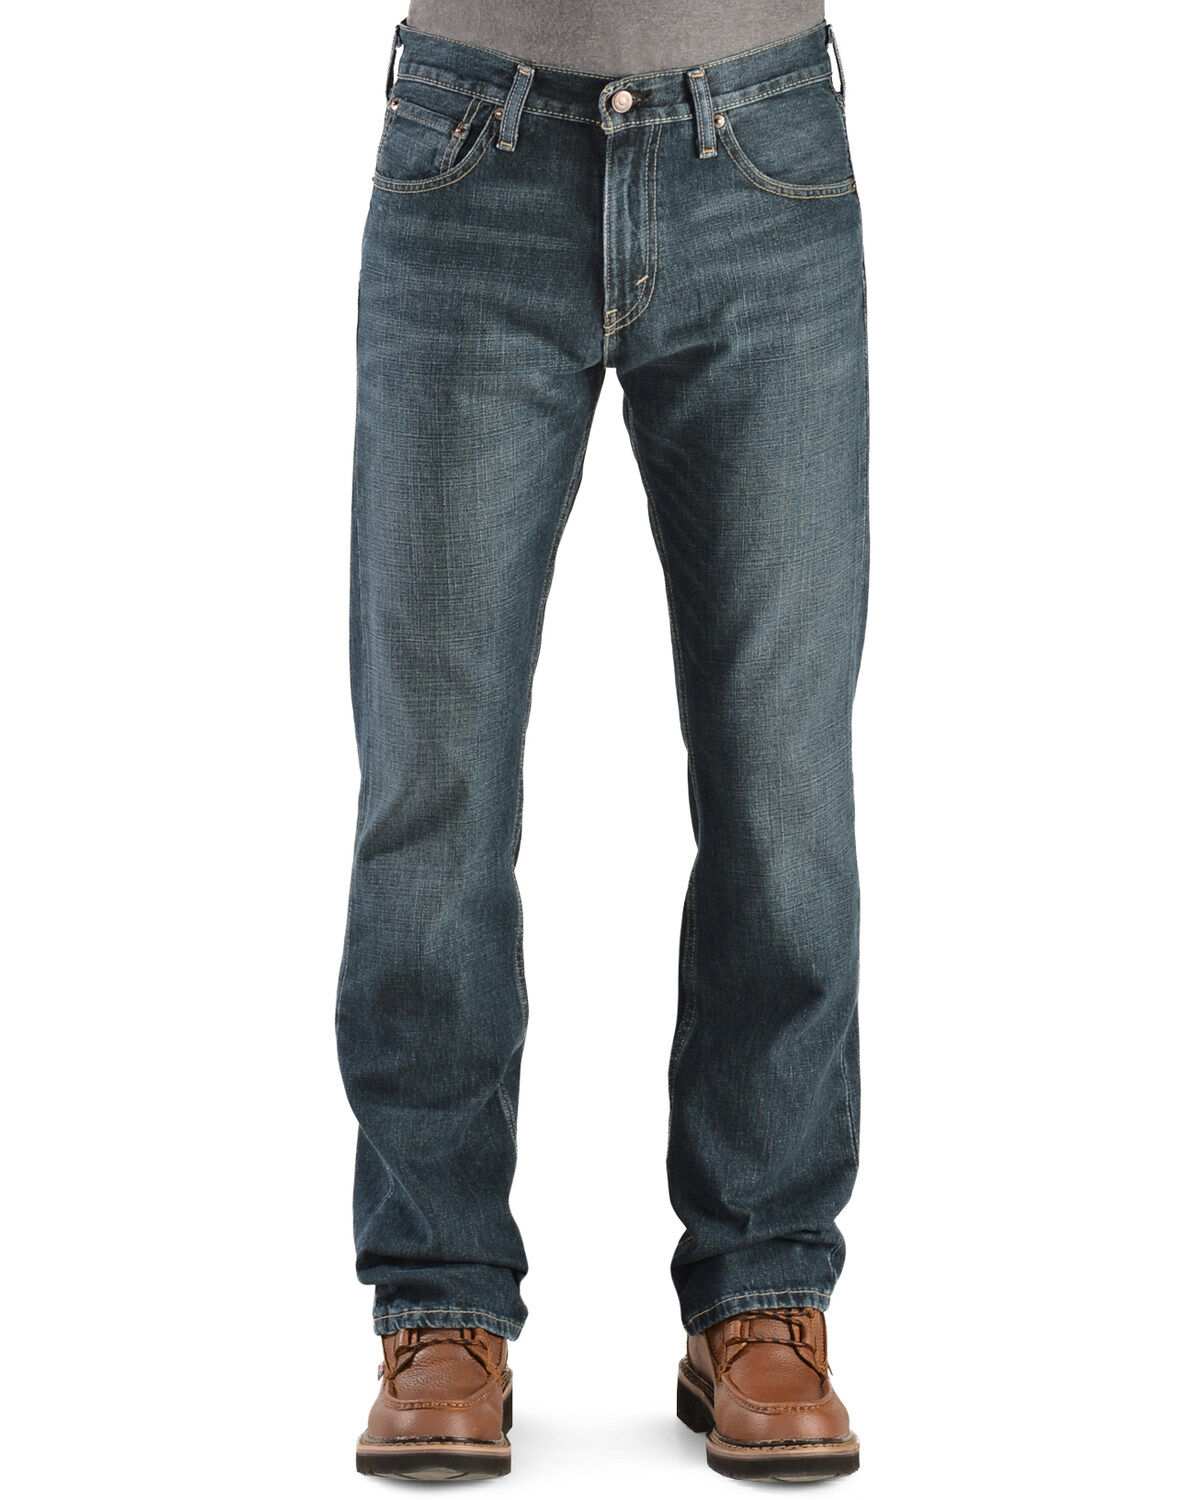 527® Low Rise Boot Cut Jeans | Boot Barn